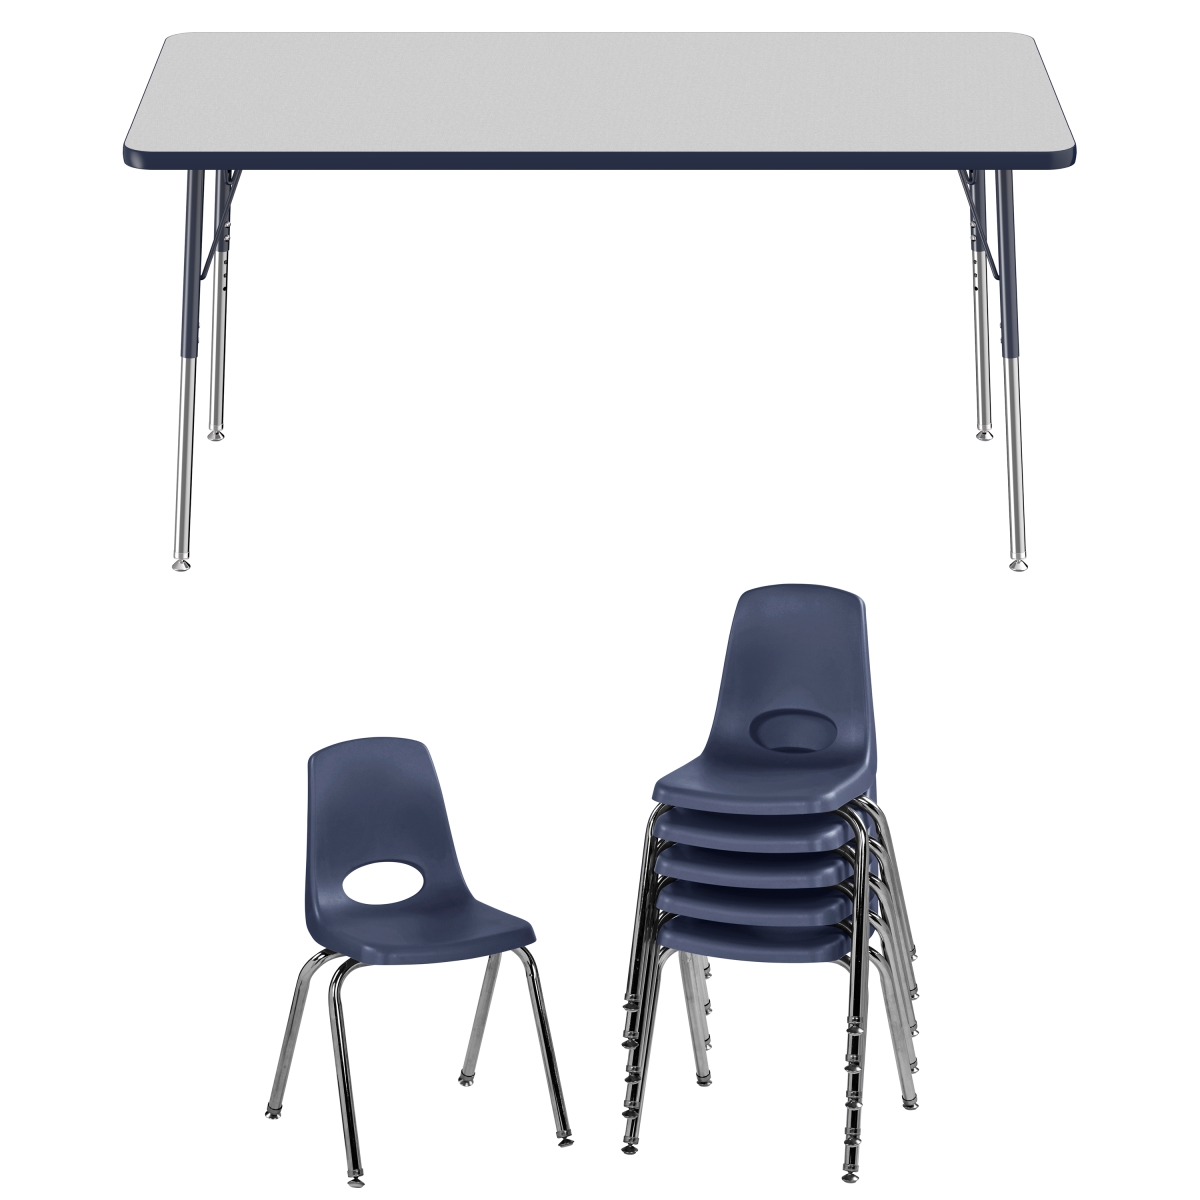 10305-gynv 30 X 60 In. Rectangle T-mold Adjustable Activity Table Standard Swivel With 6 Stack Chairs 16 In. Swivel Glide - Grey & Navy